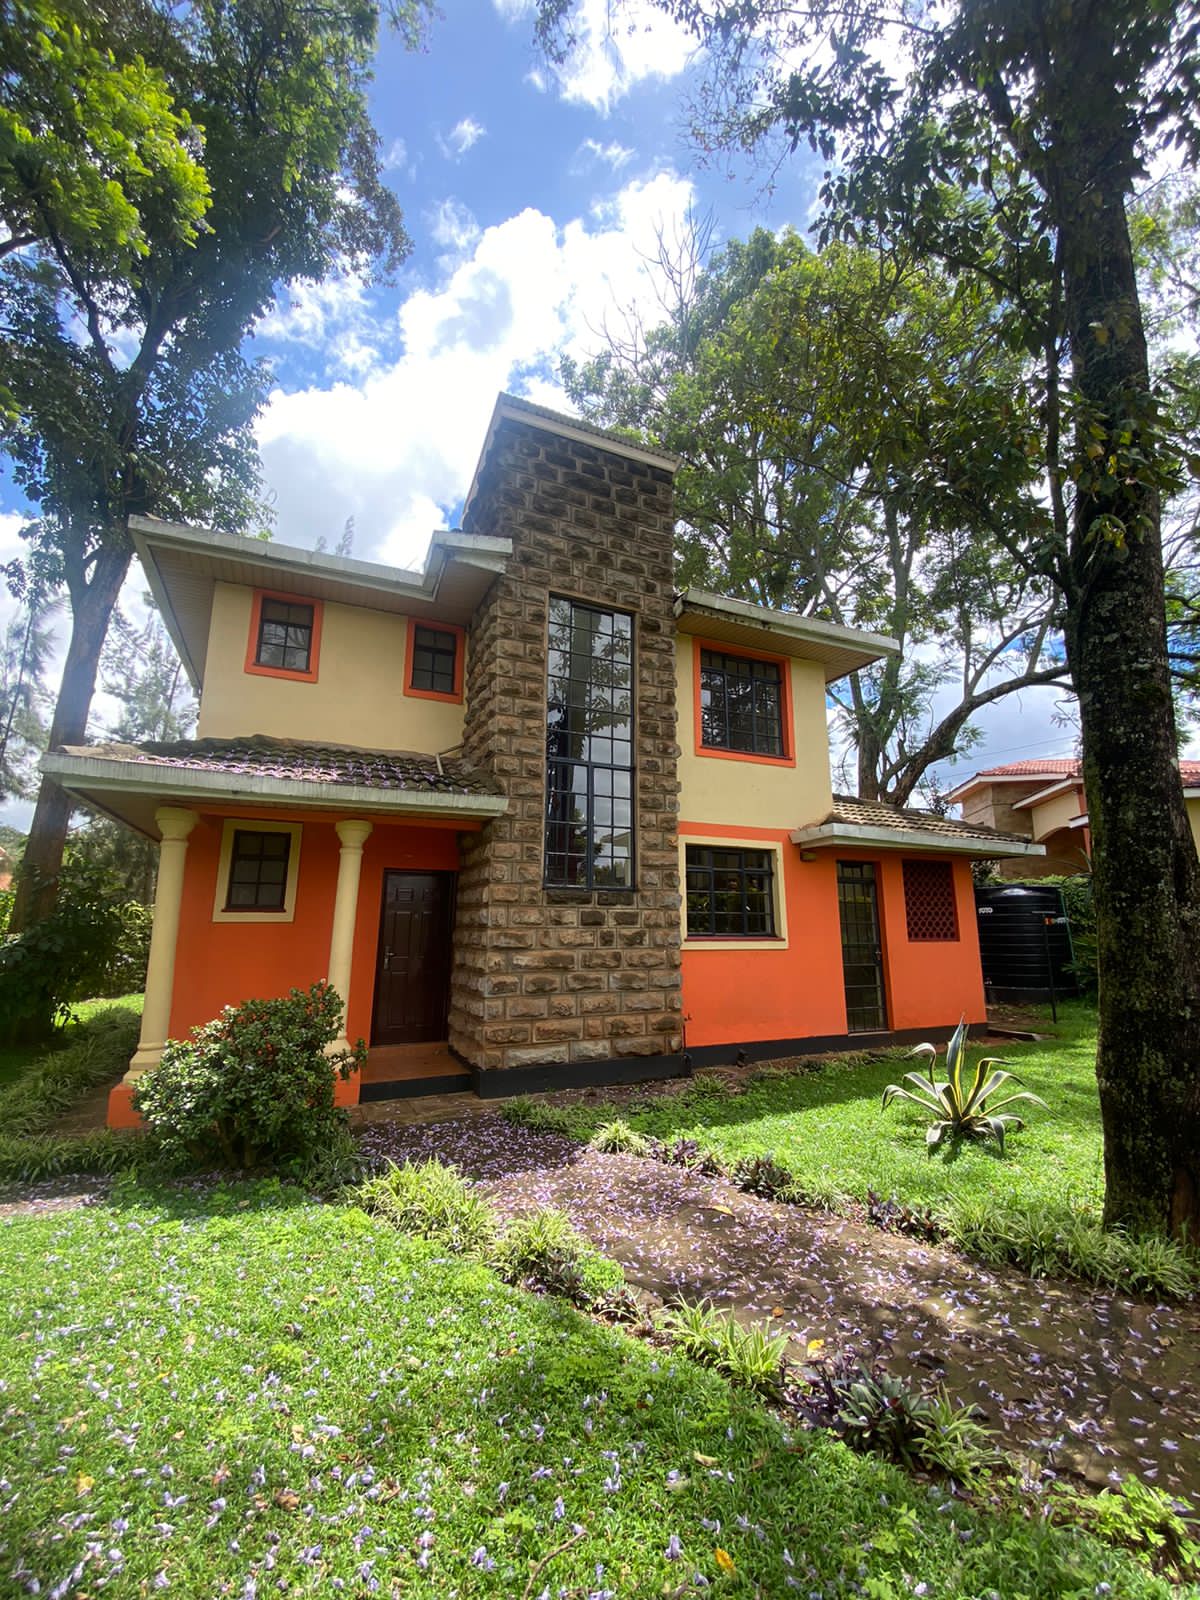 Exquisite 3 bedroom plus detached dsq in a gated community to LET along Kiambu Road. Touching tarmac. Rent Kshs 130k Musilli Homes